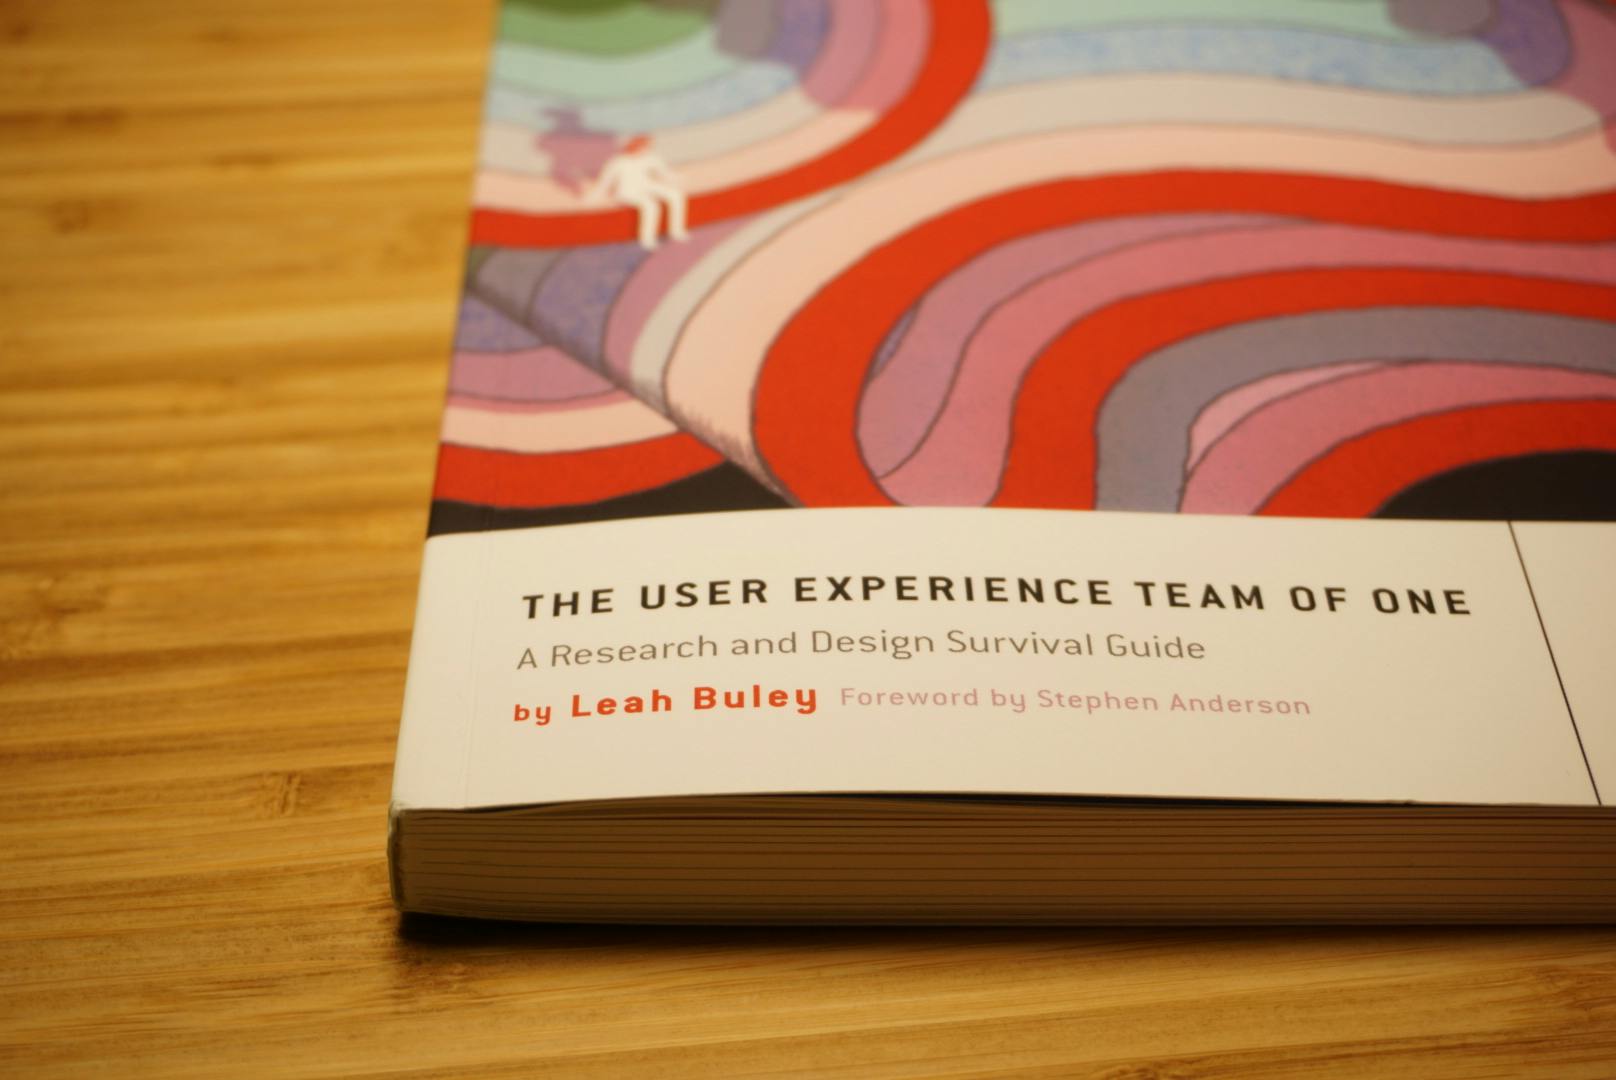 Book Recap: The User Experience Team of One by Leah Buley